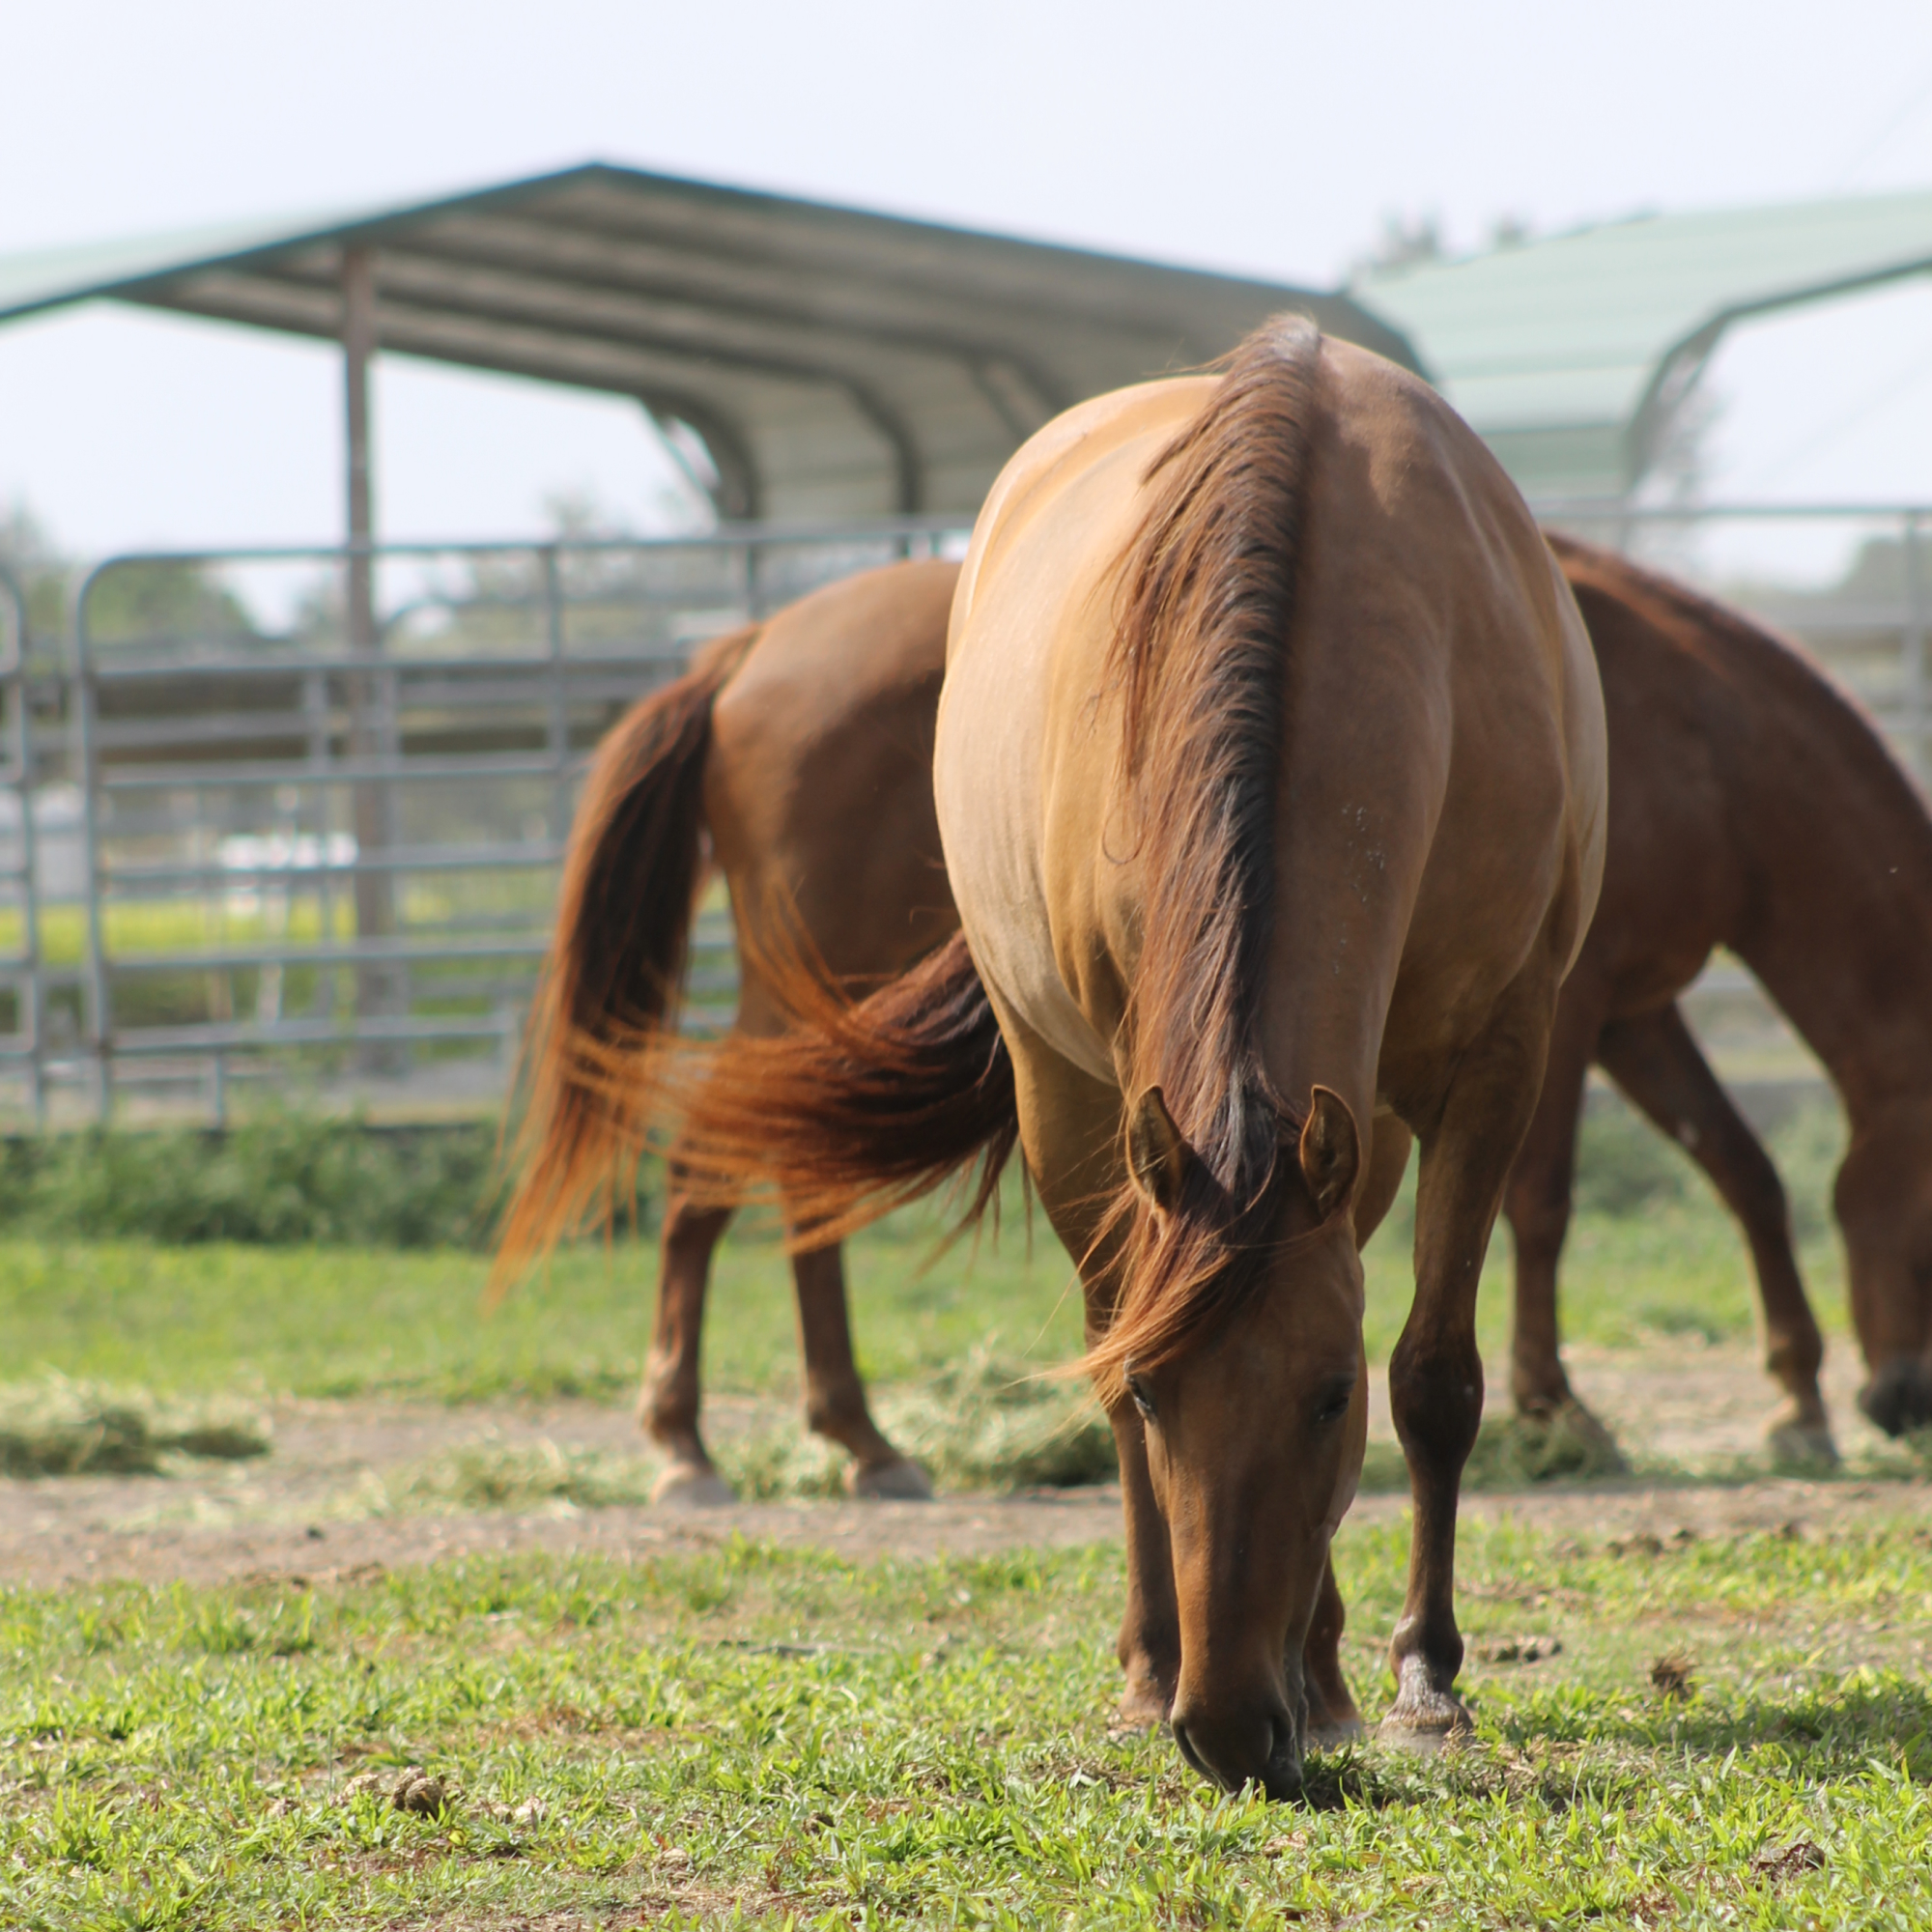 South Florida SPCA rescues horses and livestock from a lifetime of neglect and mistreatment